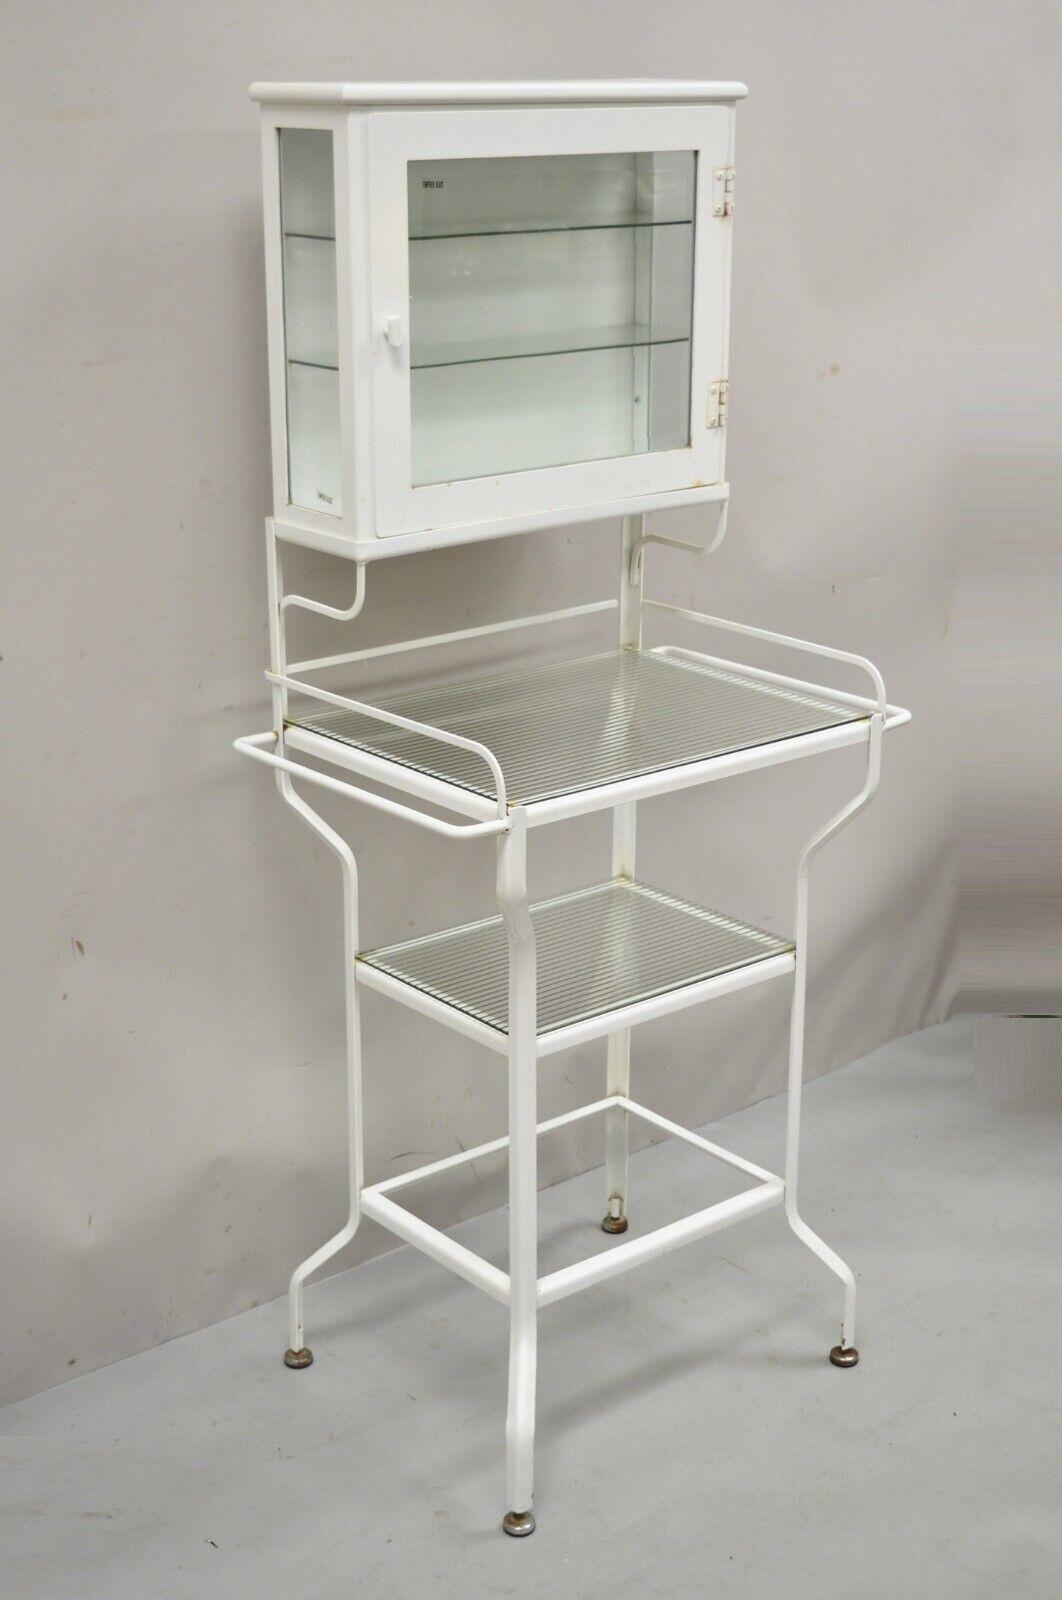 Retro vintage style Industrial metal white bathroom cabinet vanity stand. Item features upper swing door with 2 glass shelves, towel rods to sides,3 lower tiers with 2 glass shelves, Iron metal frame. Circa late 20th - early 21st century.